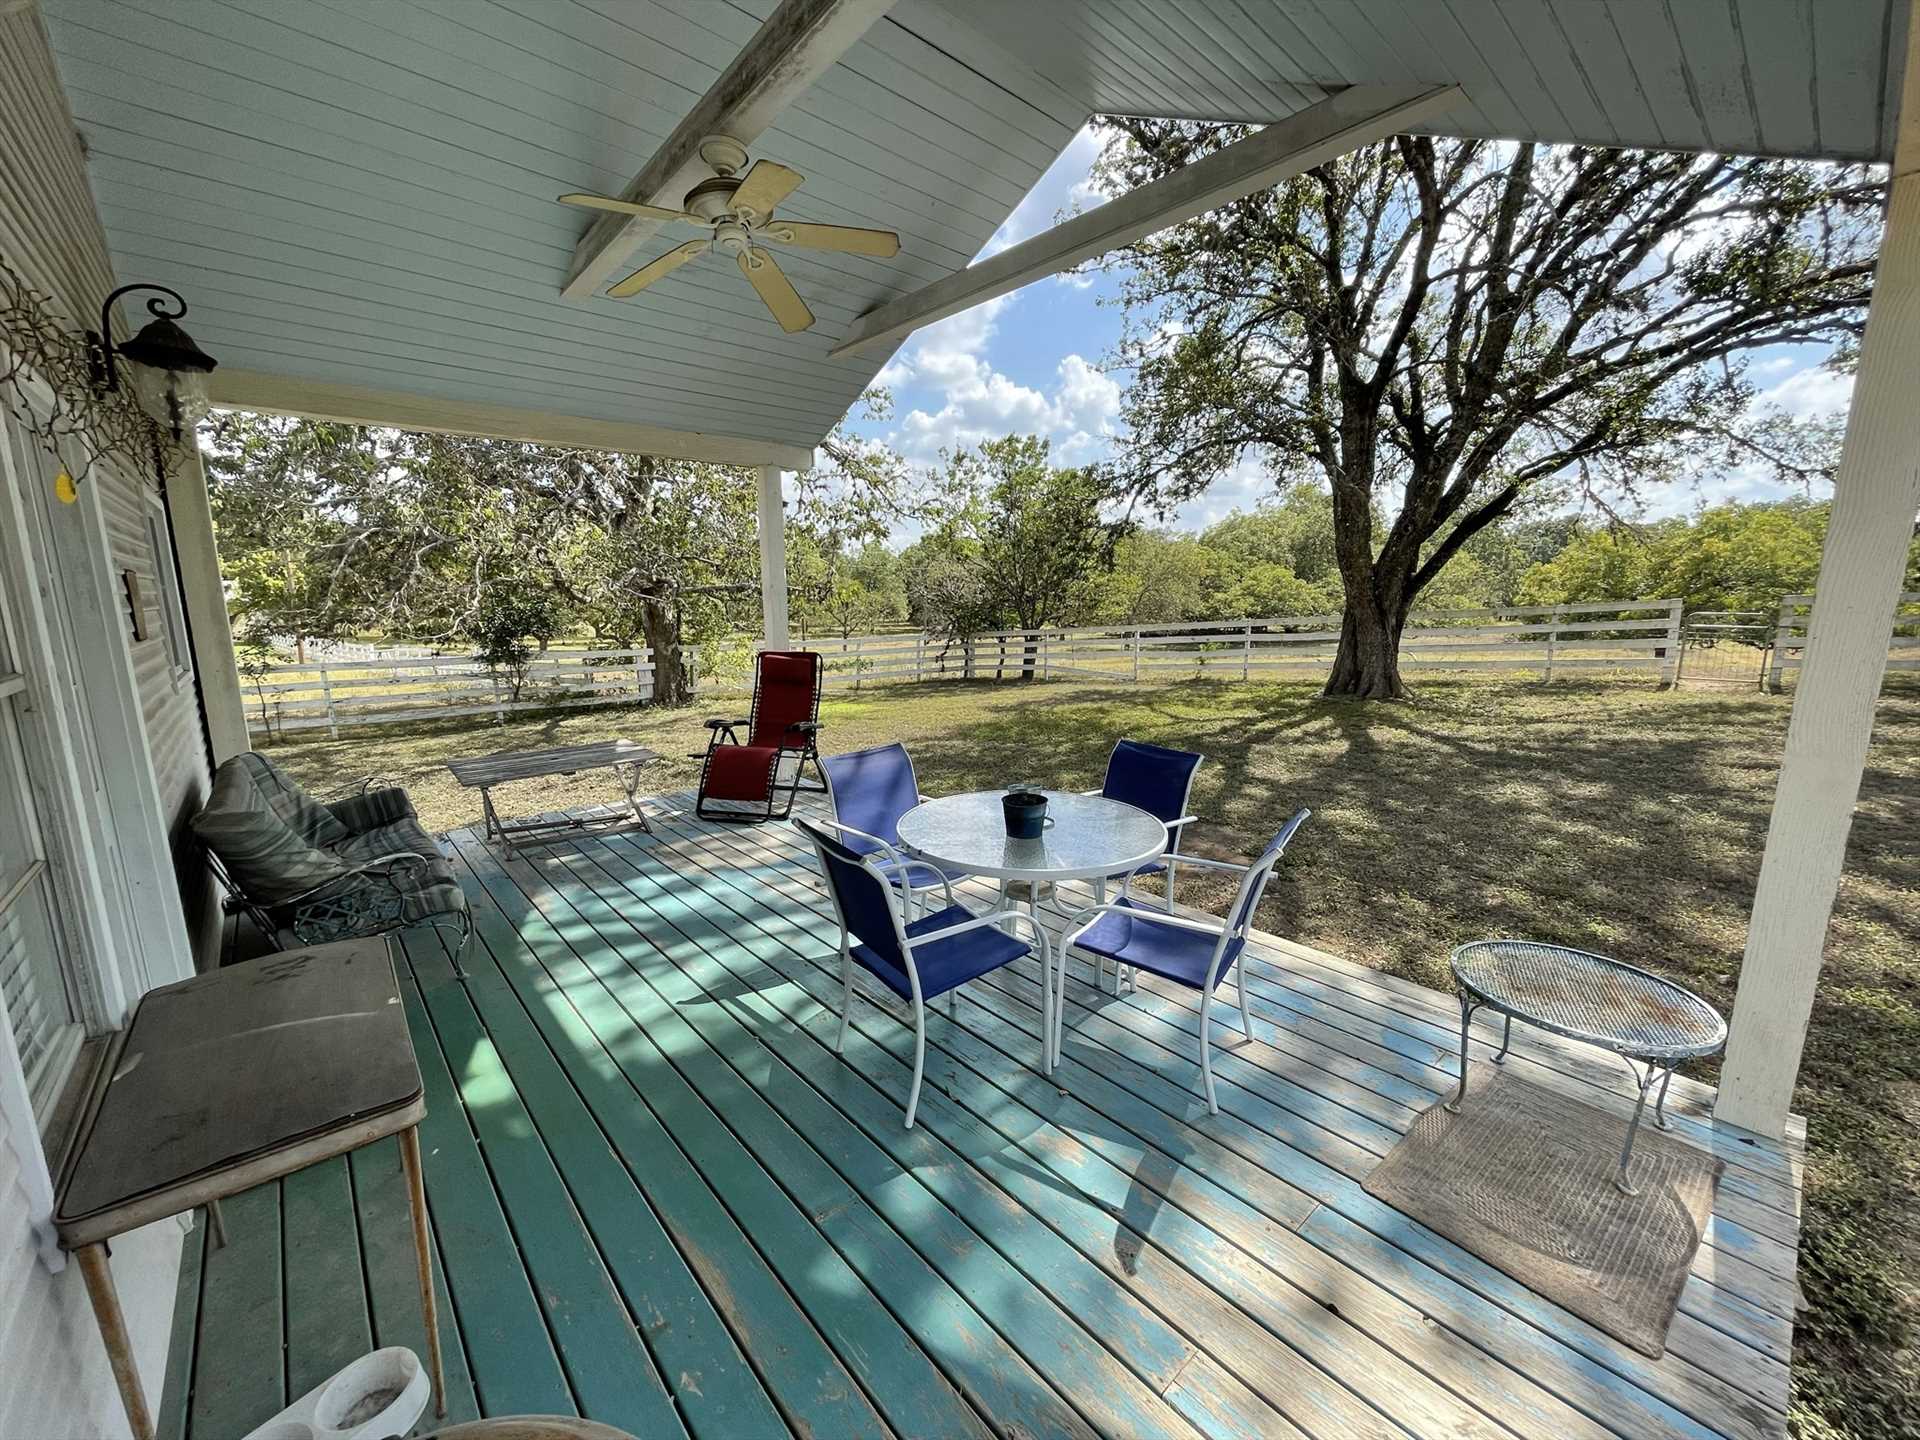                                                 There's plenty of room for kids to have fun in the back yard, and the shaded deck is perfect for conversation and savoring the inspiring Hill Country views!